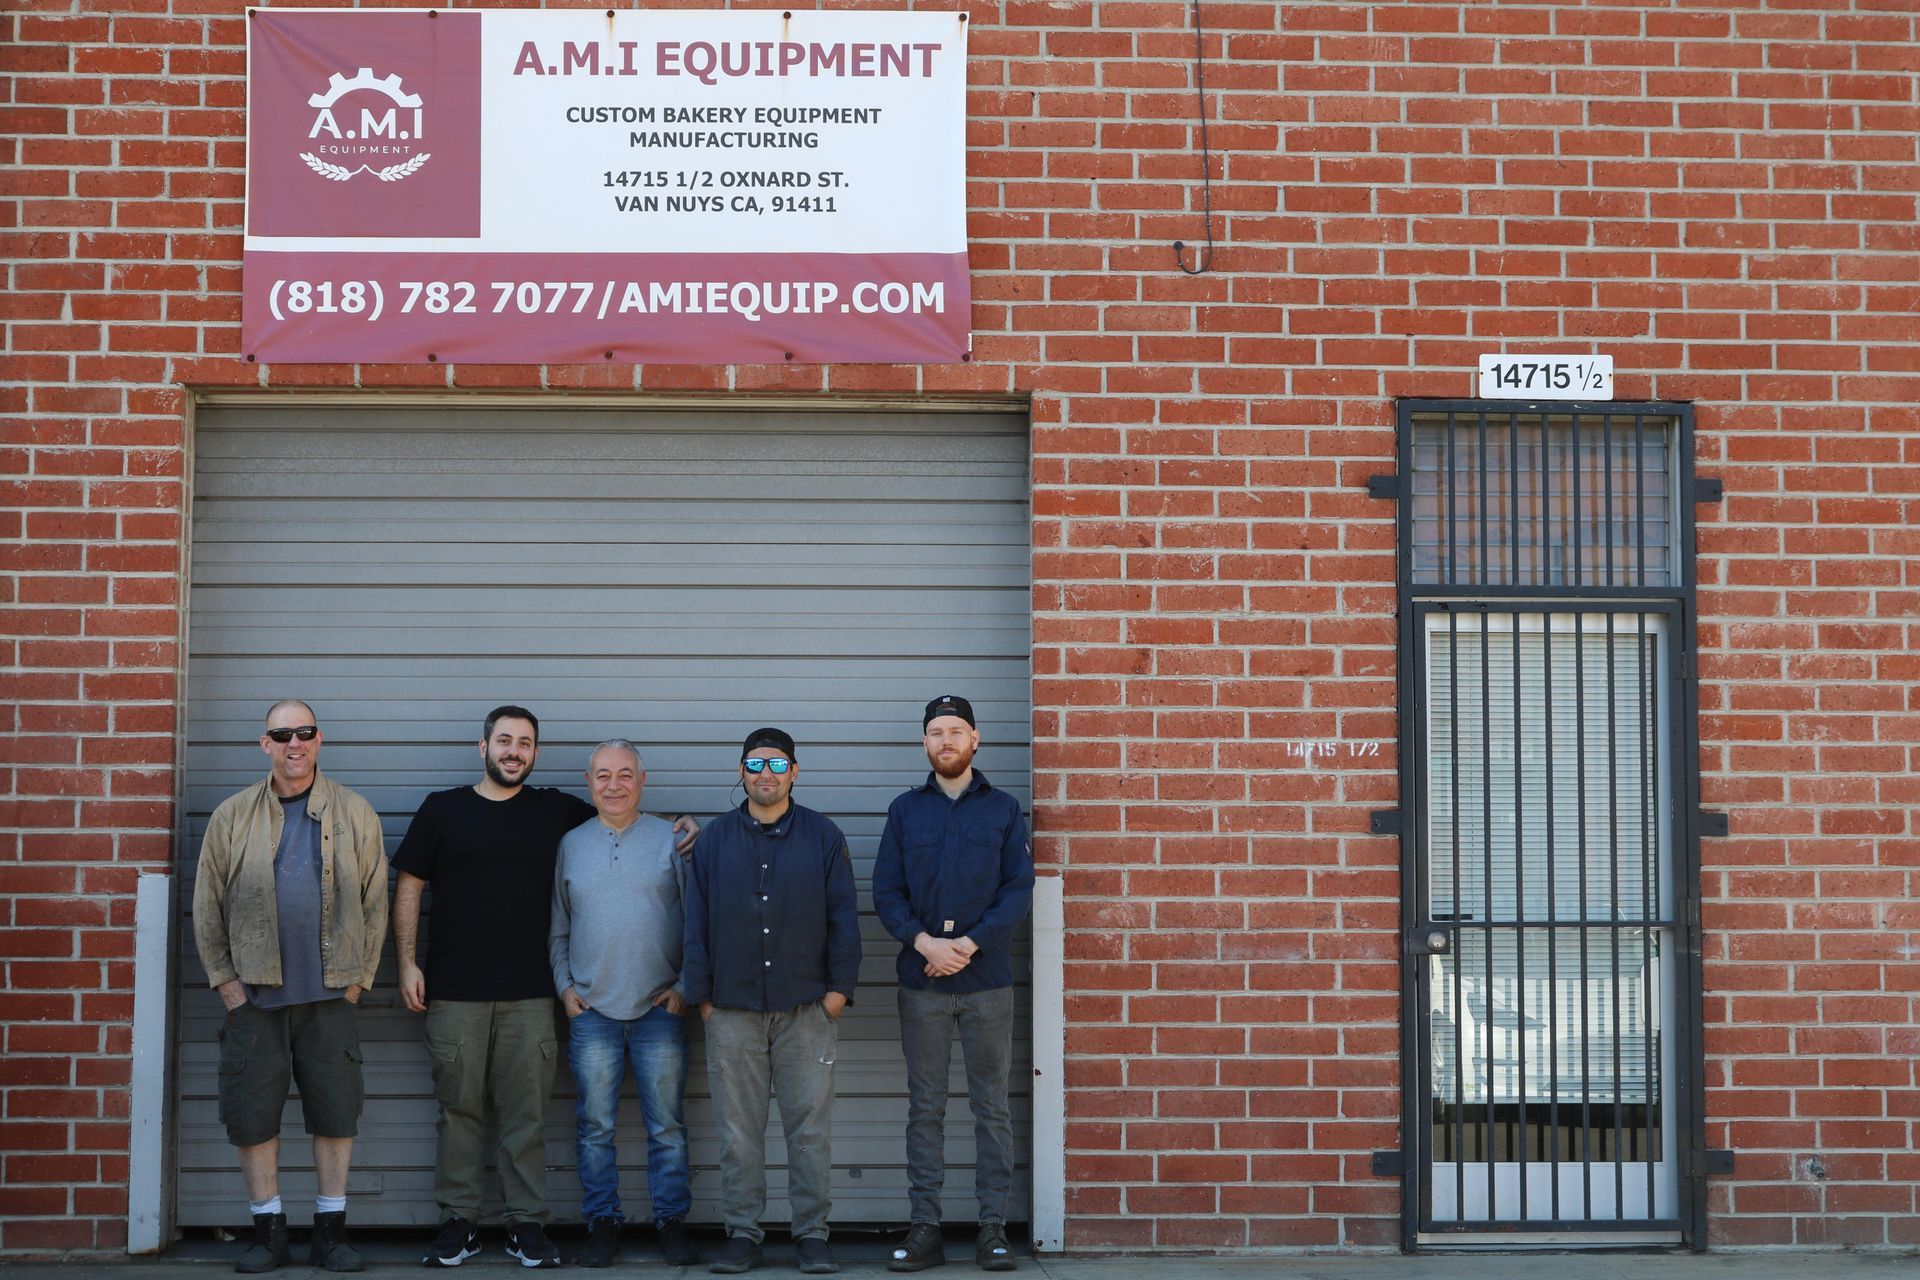 AMI Equipment team standing in front of AMI Equipment's building.